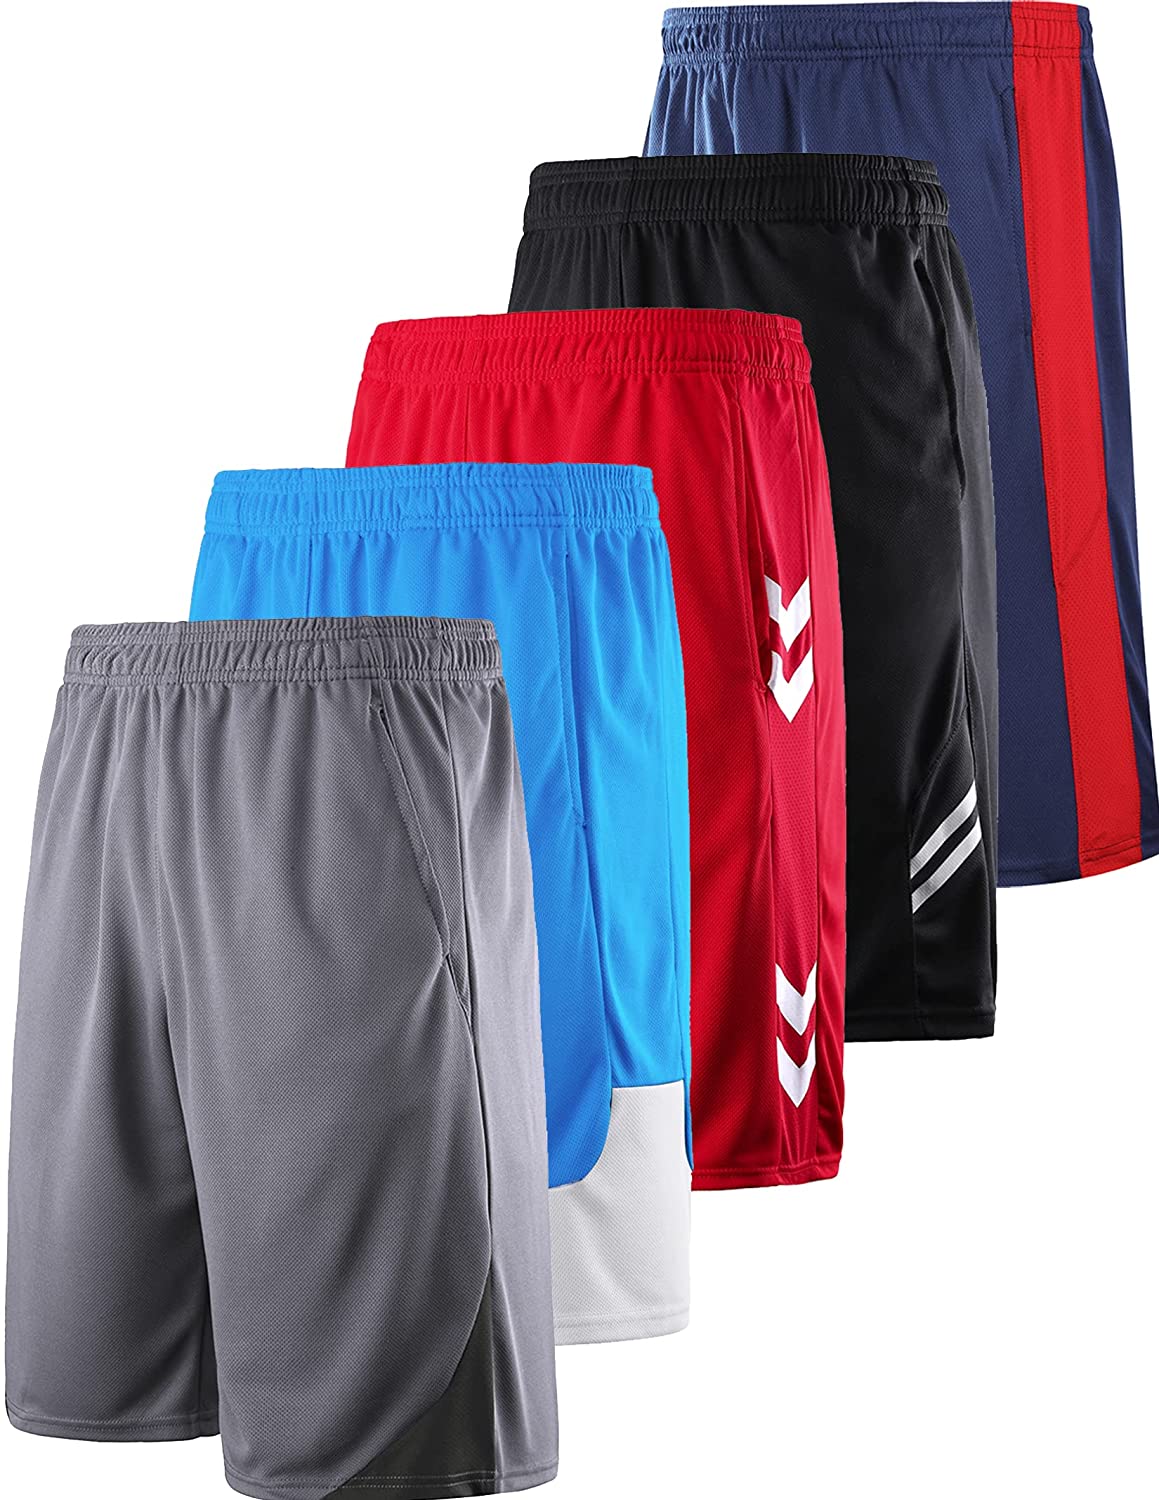 Liberty Imports Pack of 5 Men's Athletic Basketball Shorts with Pockets  Mesh Qui